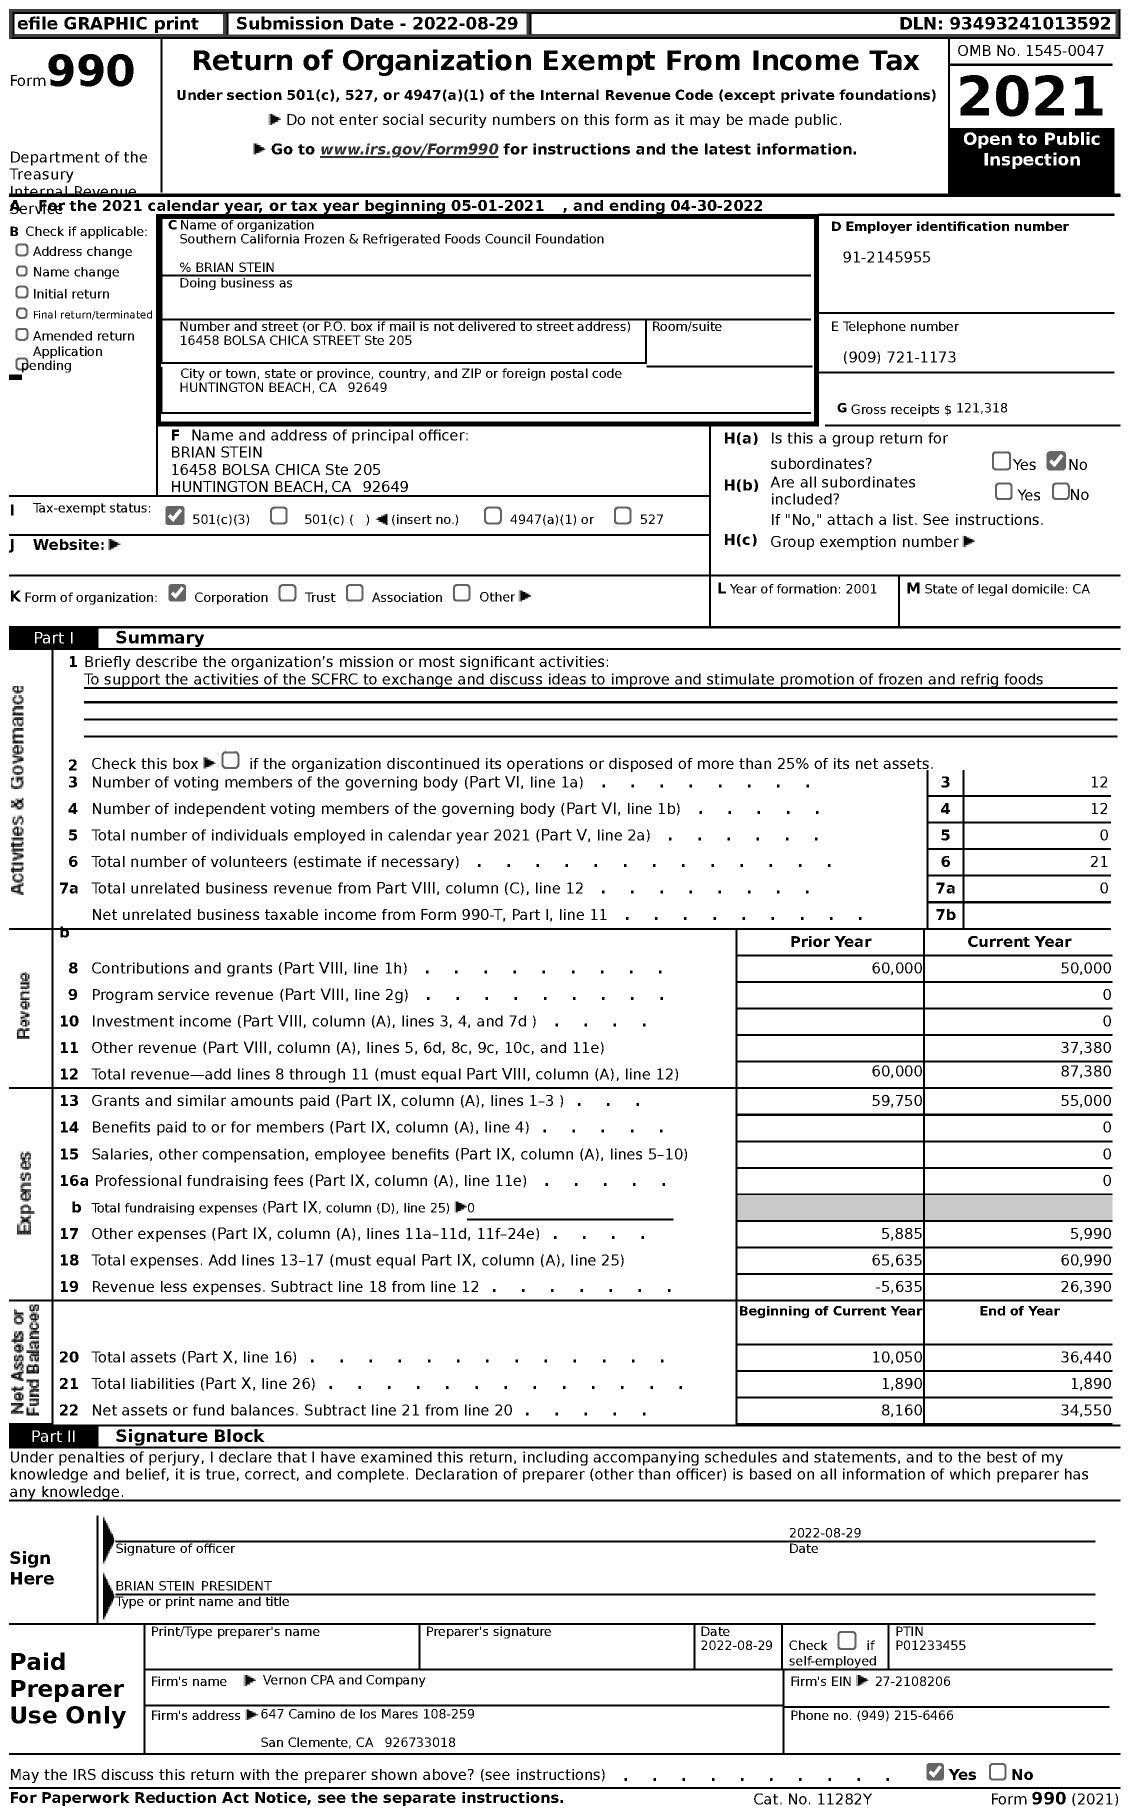 Image of first page of 2021 Form 990 for Southern California Frozen & Refrigerated Foods Council Foundation